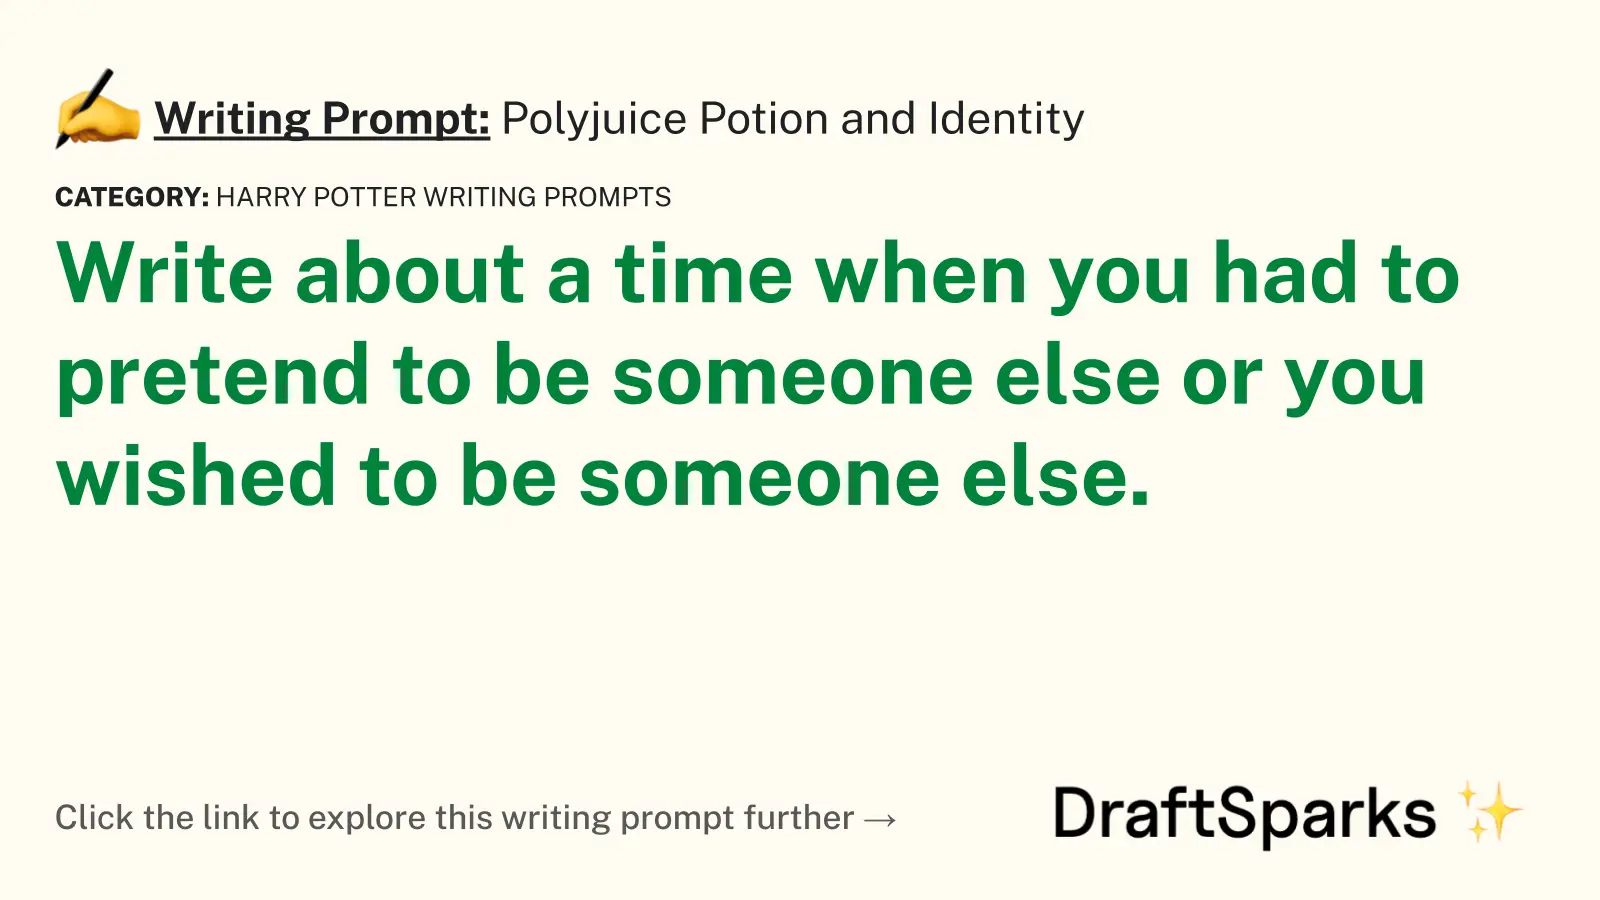 Polyjuice Potion and Identity